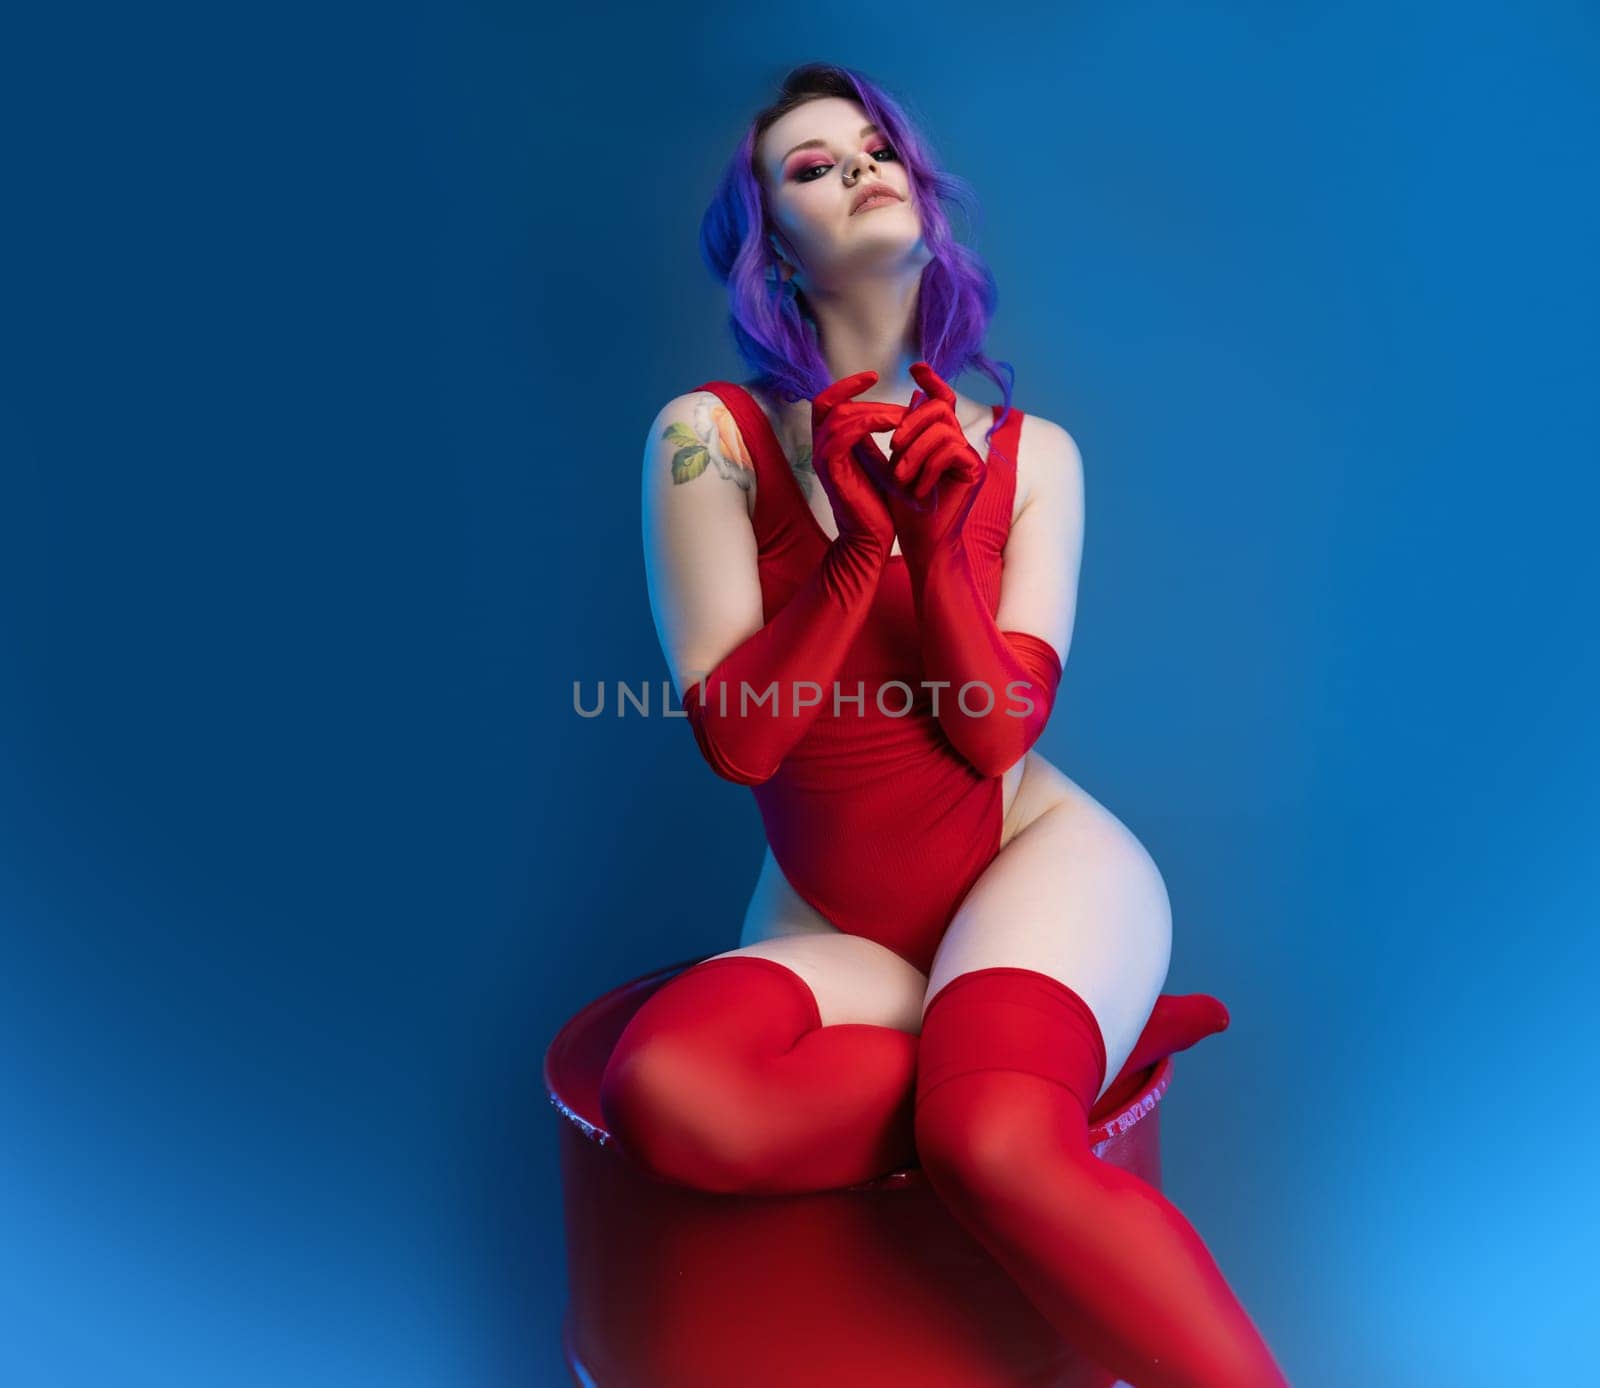 the sexy girl in red bodysuit stockings and red gloves poses erotically against the background